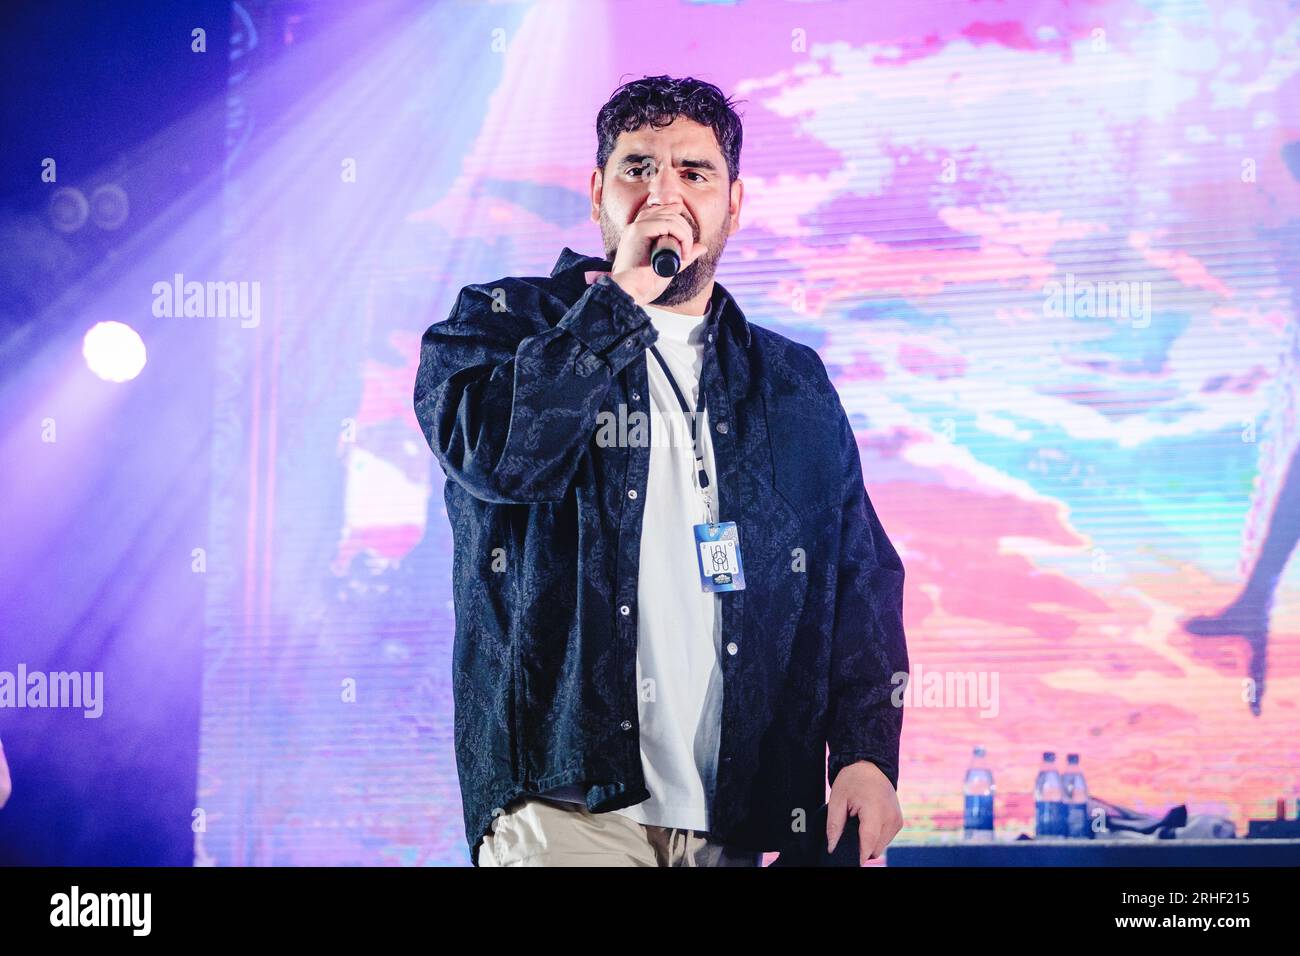 Gothenburg, Sweden. 11th, August 2023. The Swedish rapper Stor performs a live concert during the Swedish music festival Way Out West 2023 in Gothenburg. (Photo credit: Gonzales Photo - Tilman Jentzsch). Stock Photo